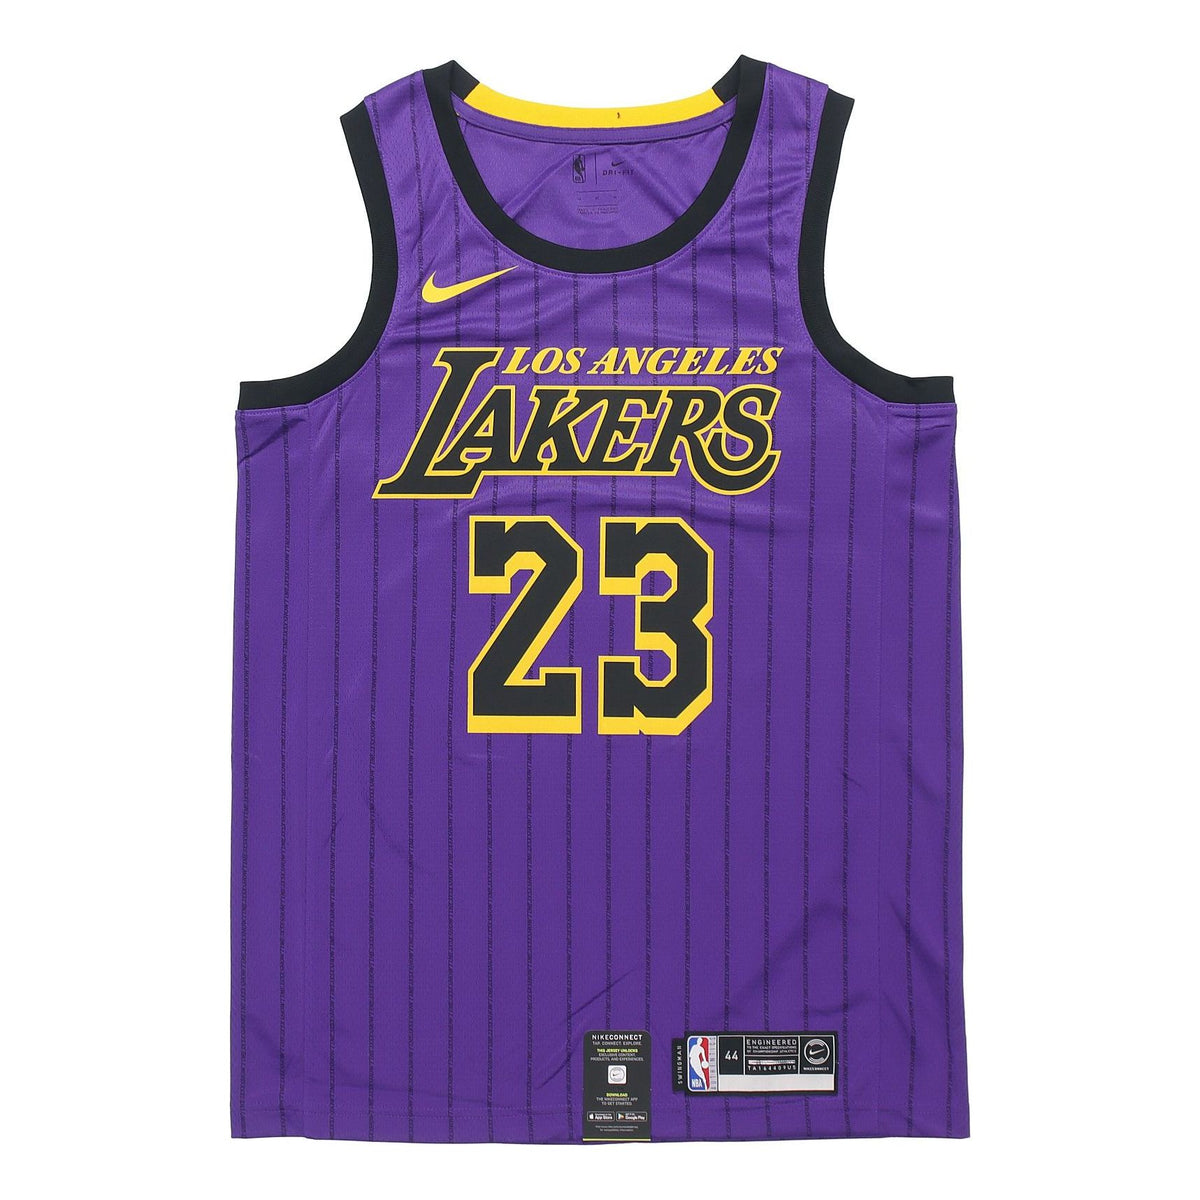 Lakers Jersey 23 Lebron James size 44 M nike for Sale in Los